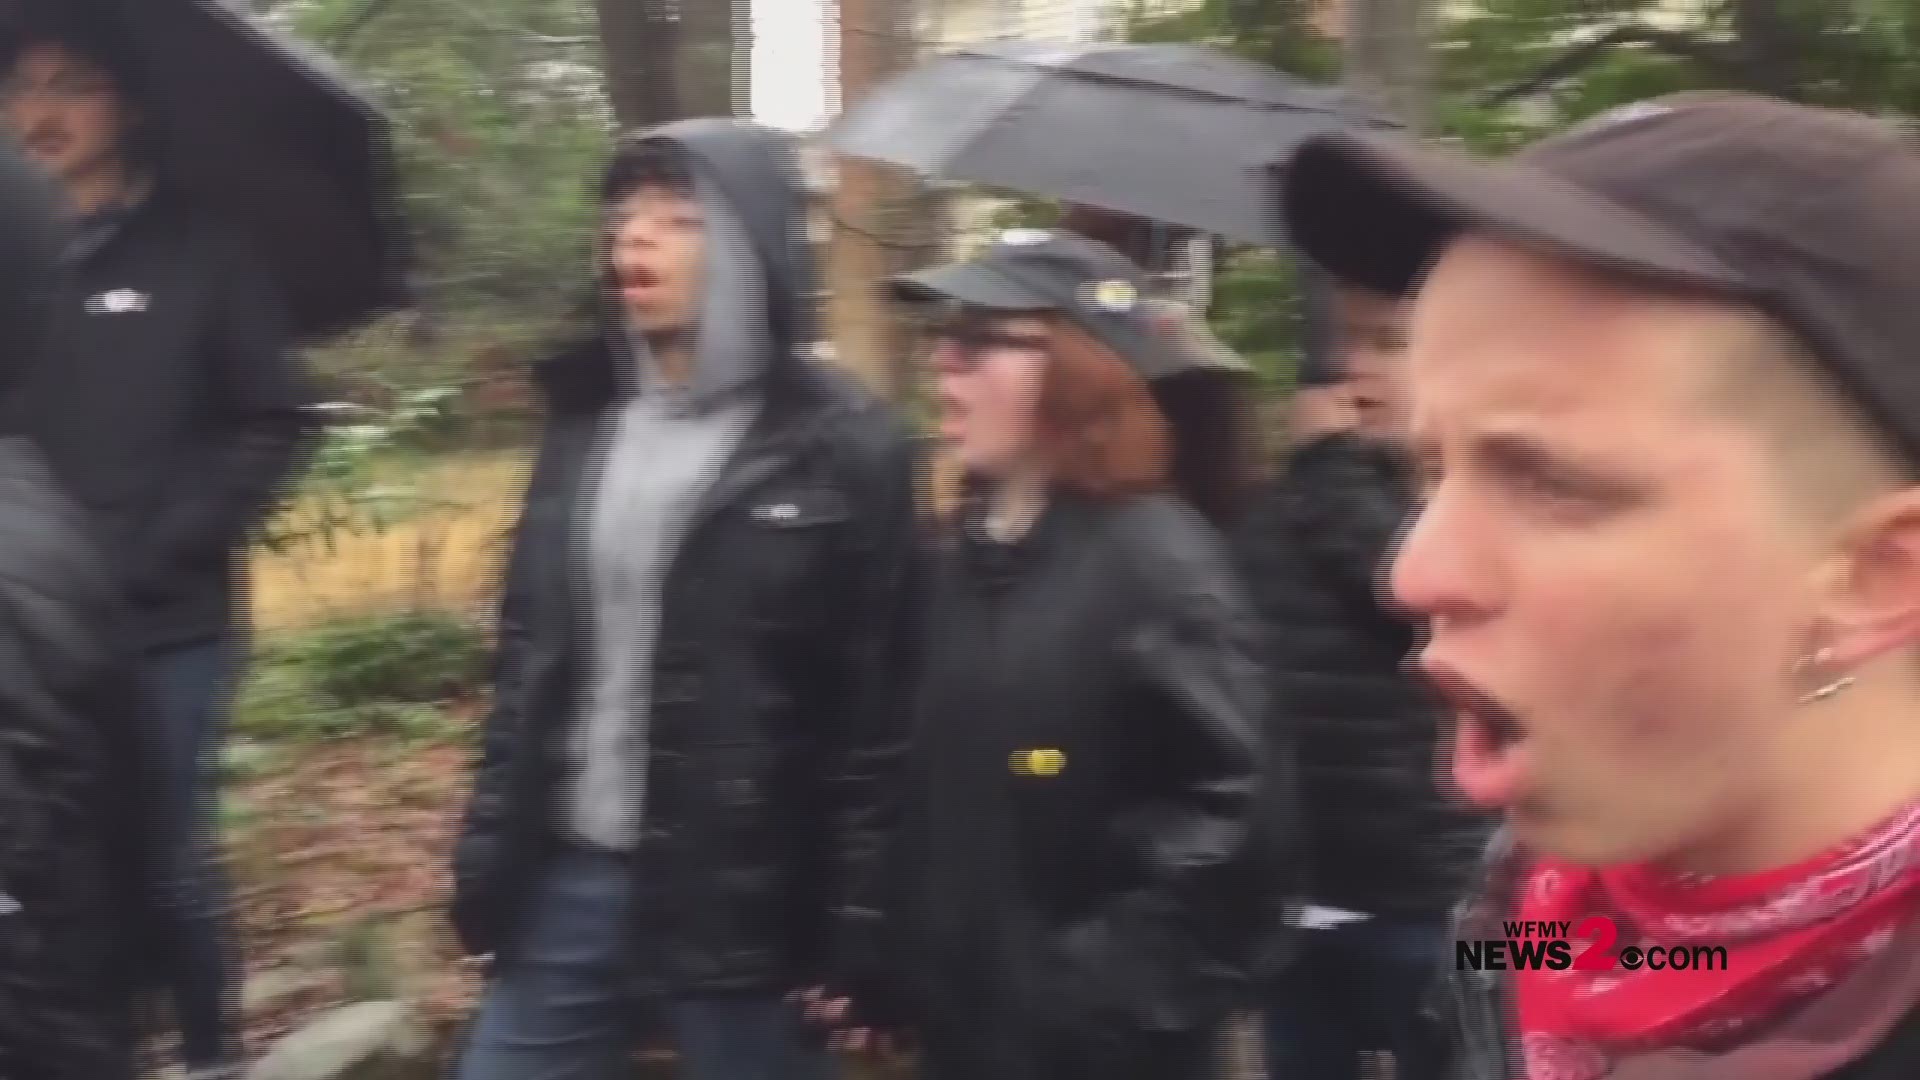 Silent Sam opponents and supporters protested on the campus of UNC-Chapel Hill Saturday, February 23.